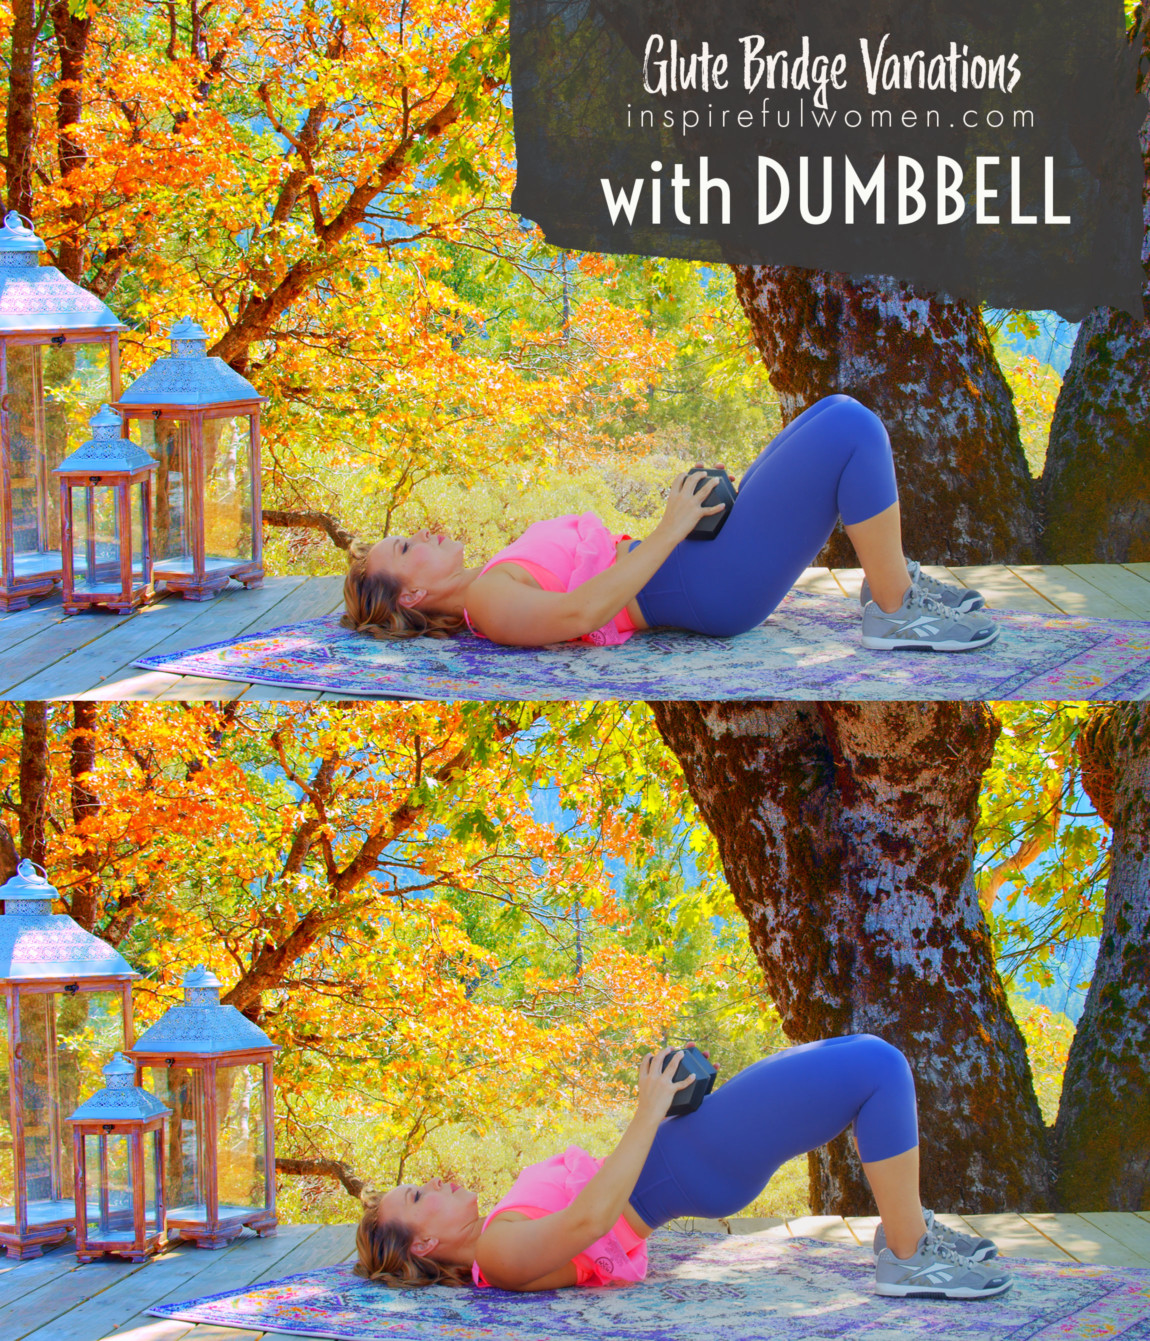 dumbbell-glute-bridge-weighted-hip-raise-variation-exercise